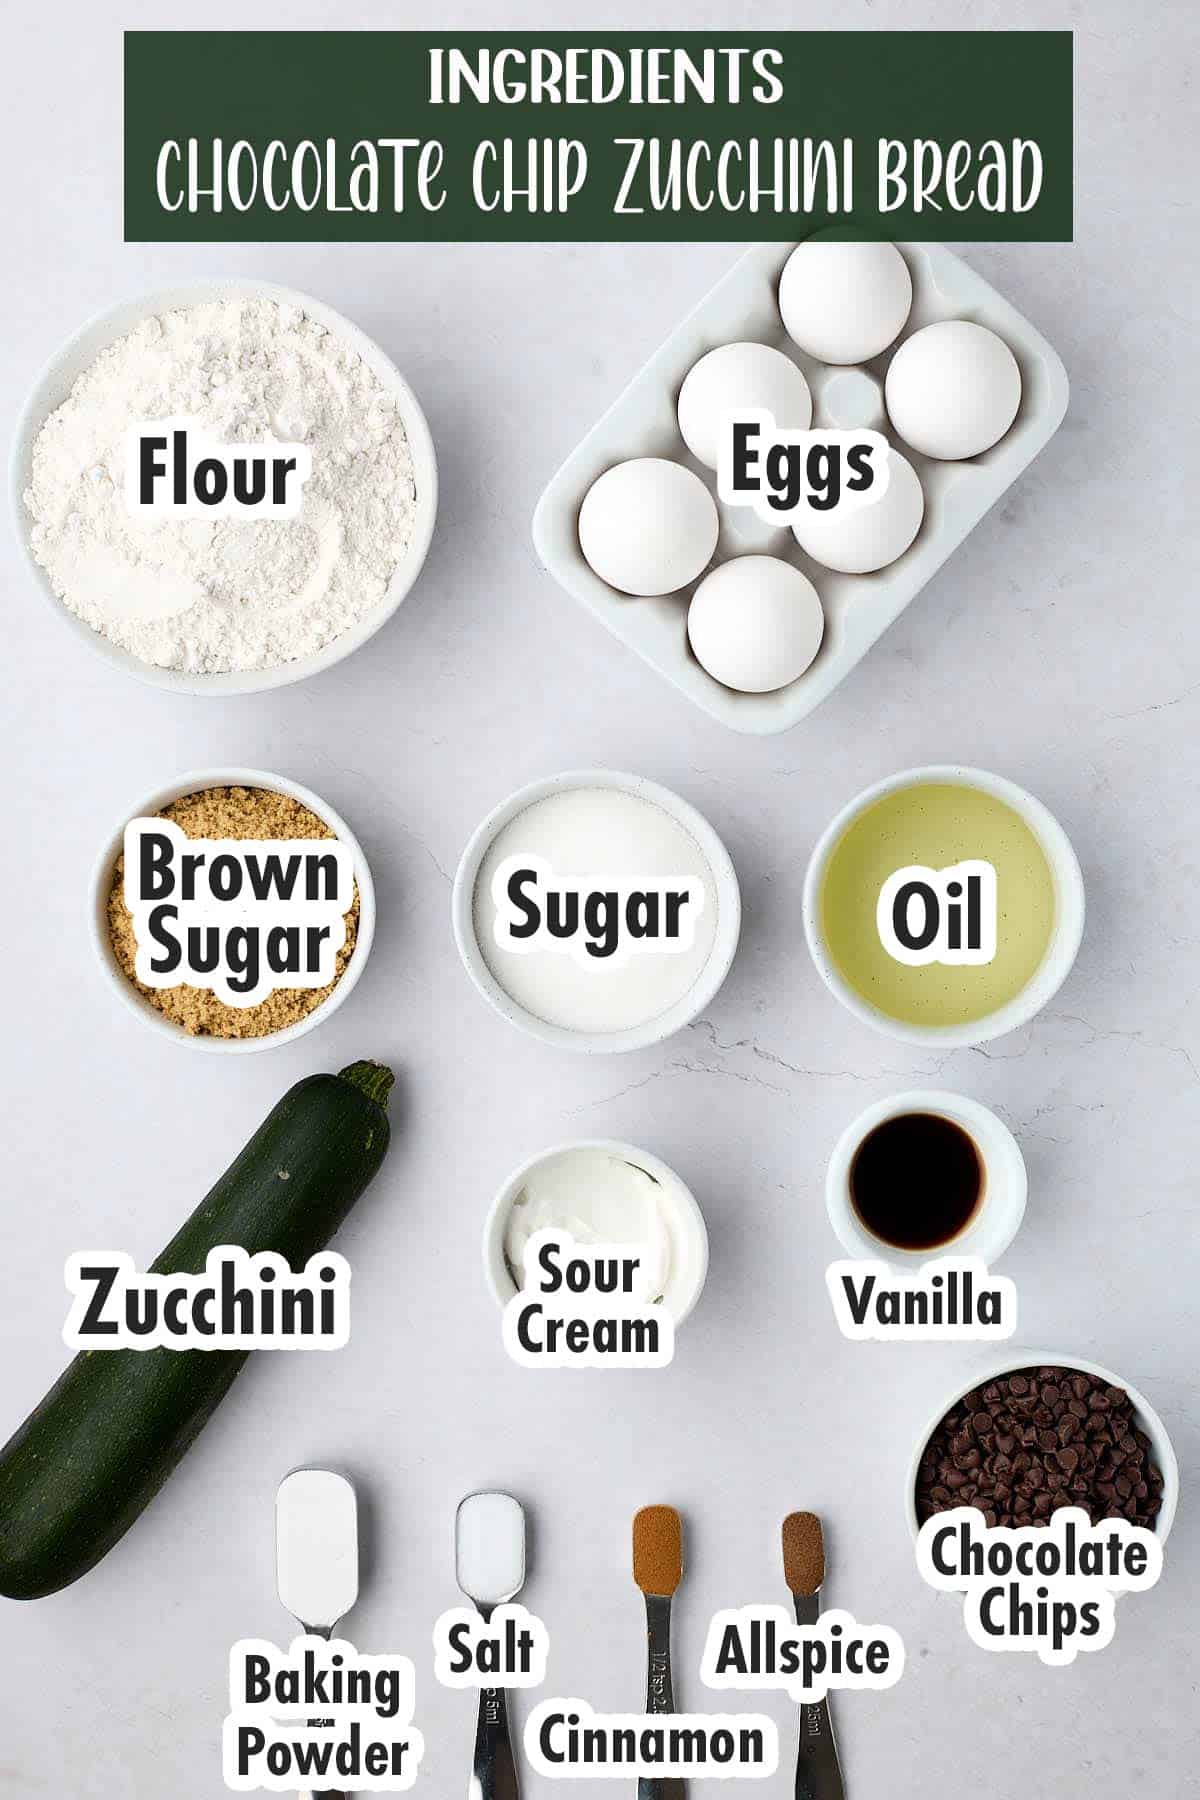 Ingredients for chocolate chip zucchini bread.